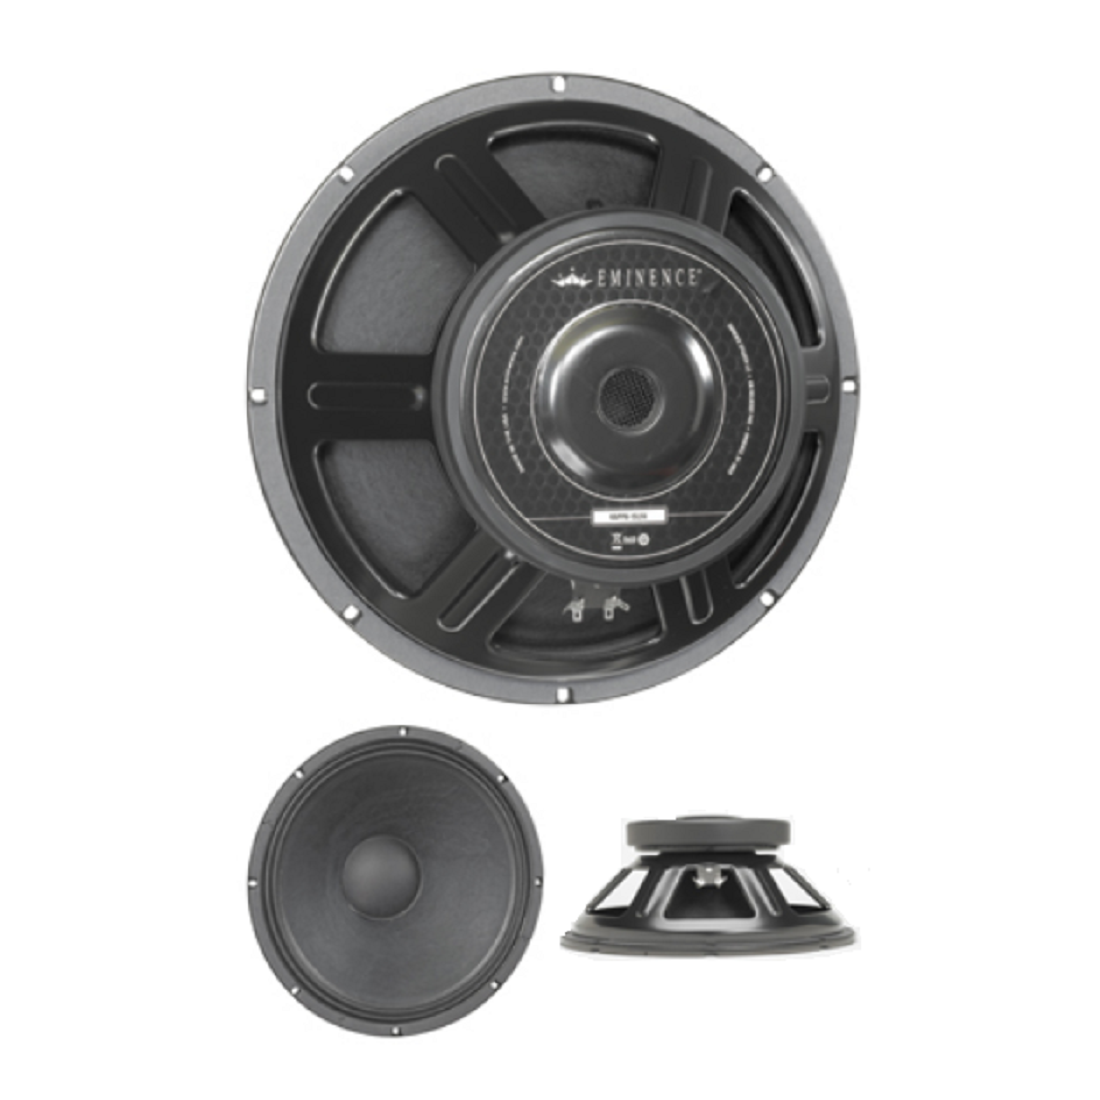 bus helpen Afkorting Eminence KAPPA-15LFA 15in Speaker 600w 8 Ohm Low Frequency Ceceres Music -  Instruments for everyone!